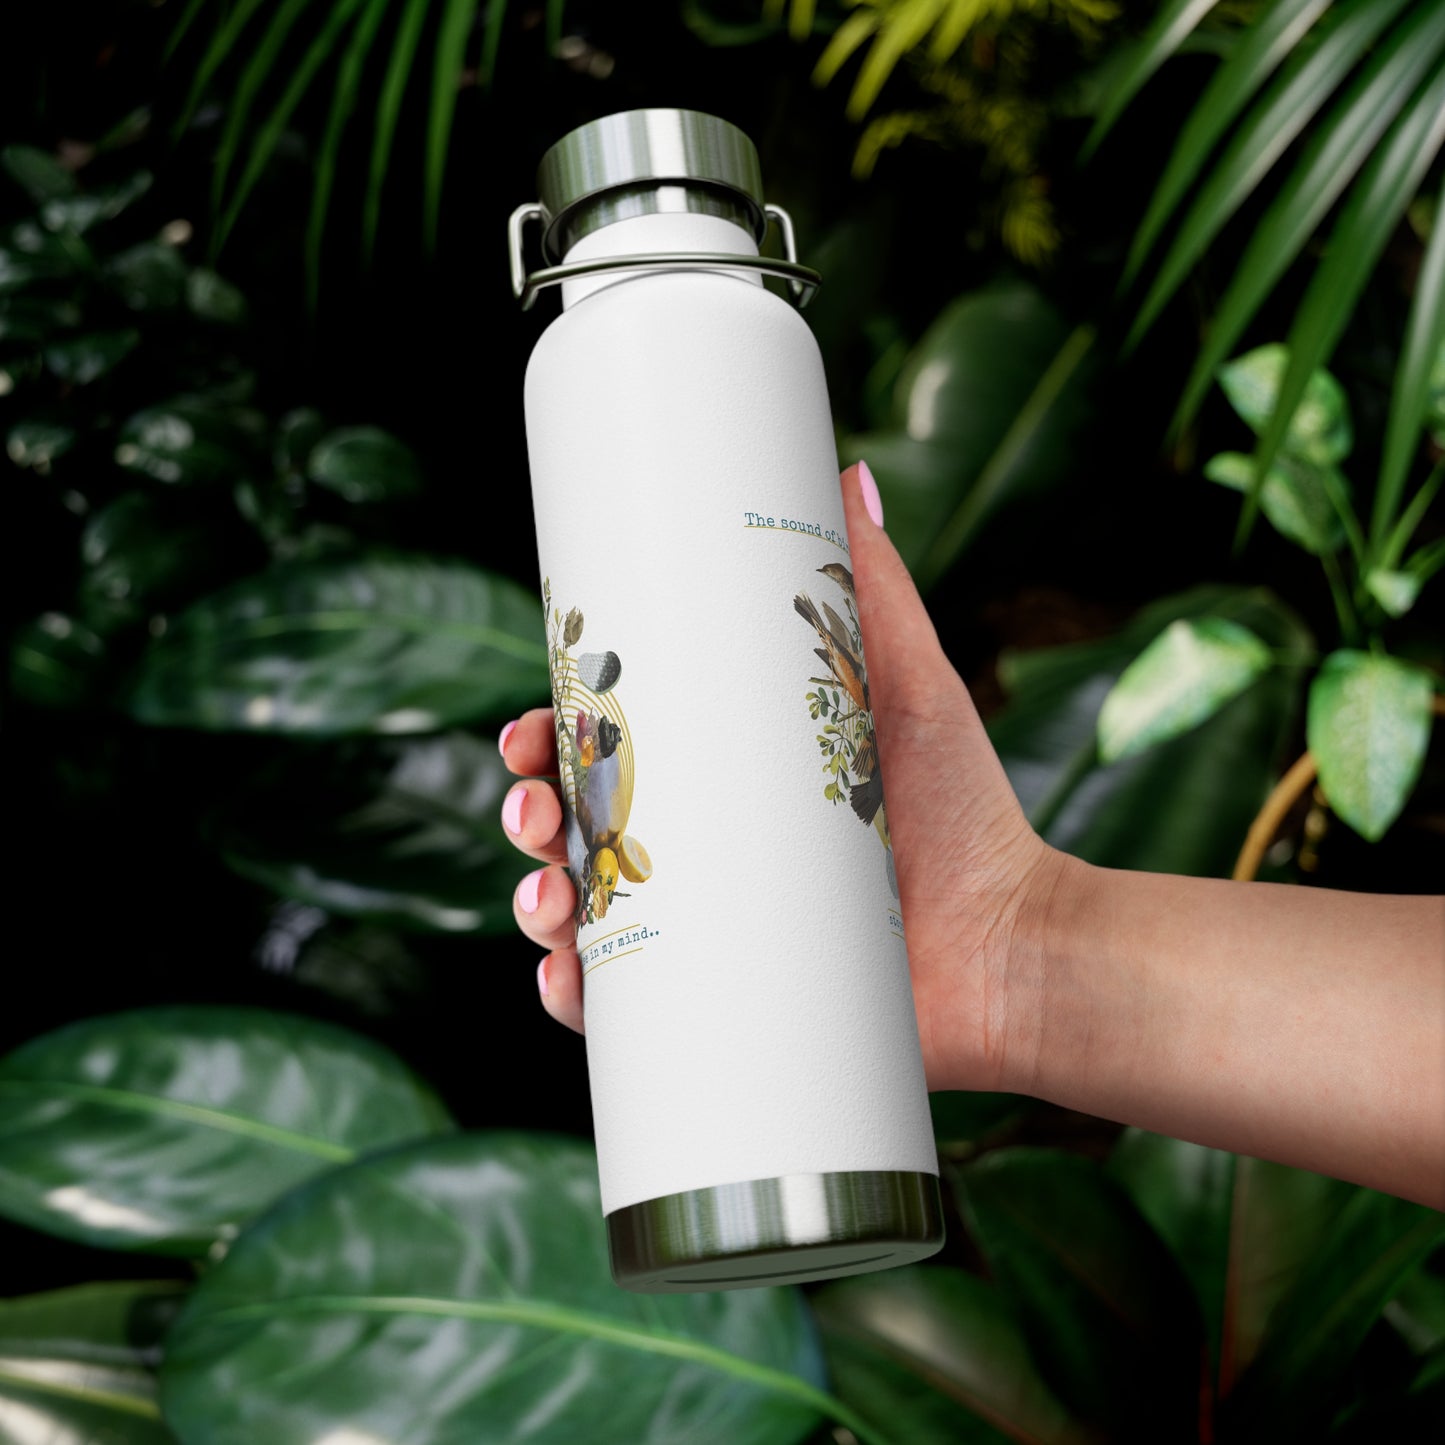 "The sound of  birds stops the noise in my mind" Copper Vacuum Insulated Bottle, 22oz